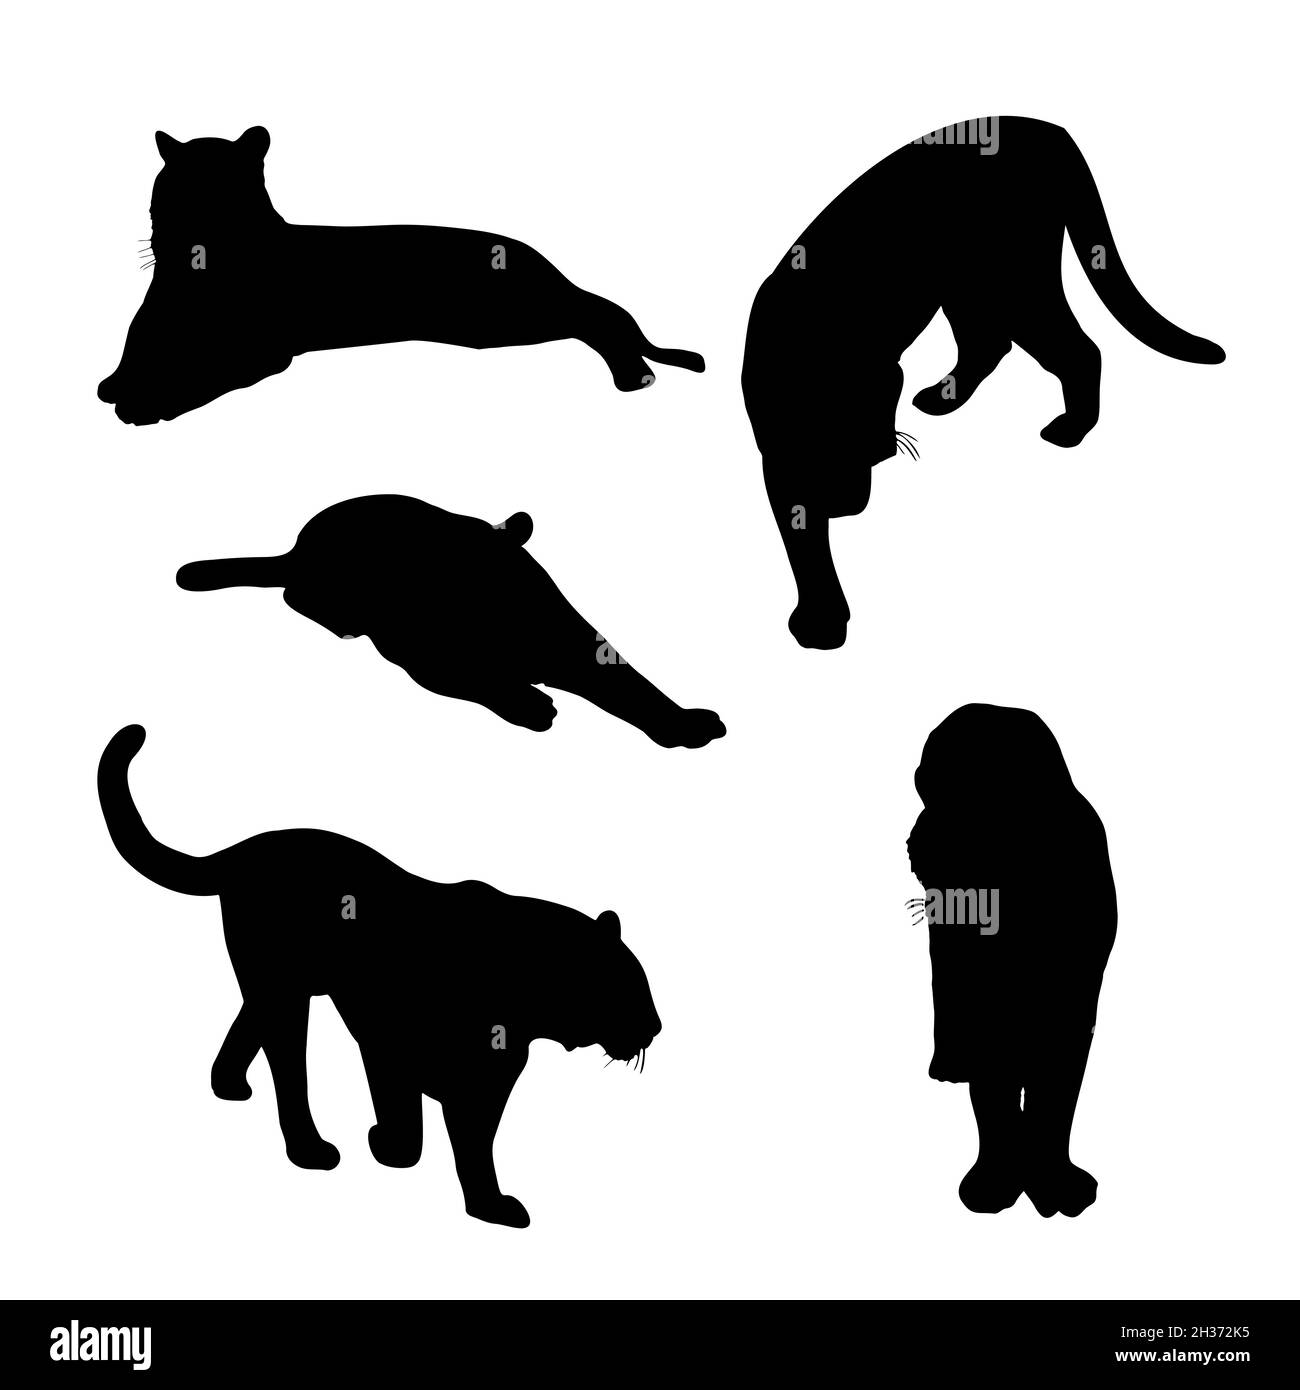 Set Of Big Tiger Black Silhouettes Chinese Tigers In Different Poses Vector Illustration Stock 